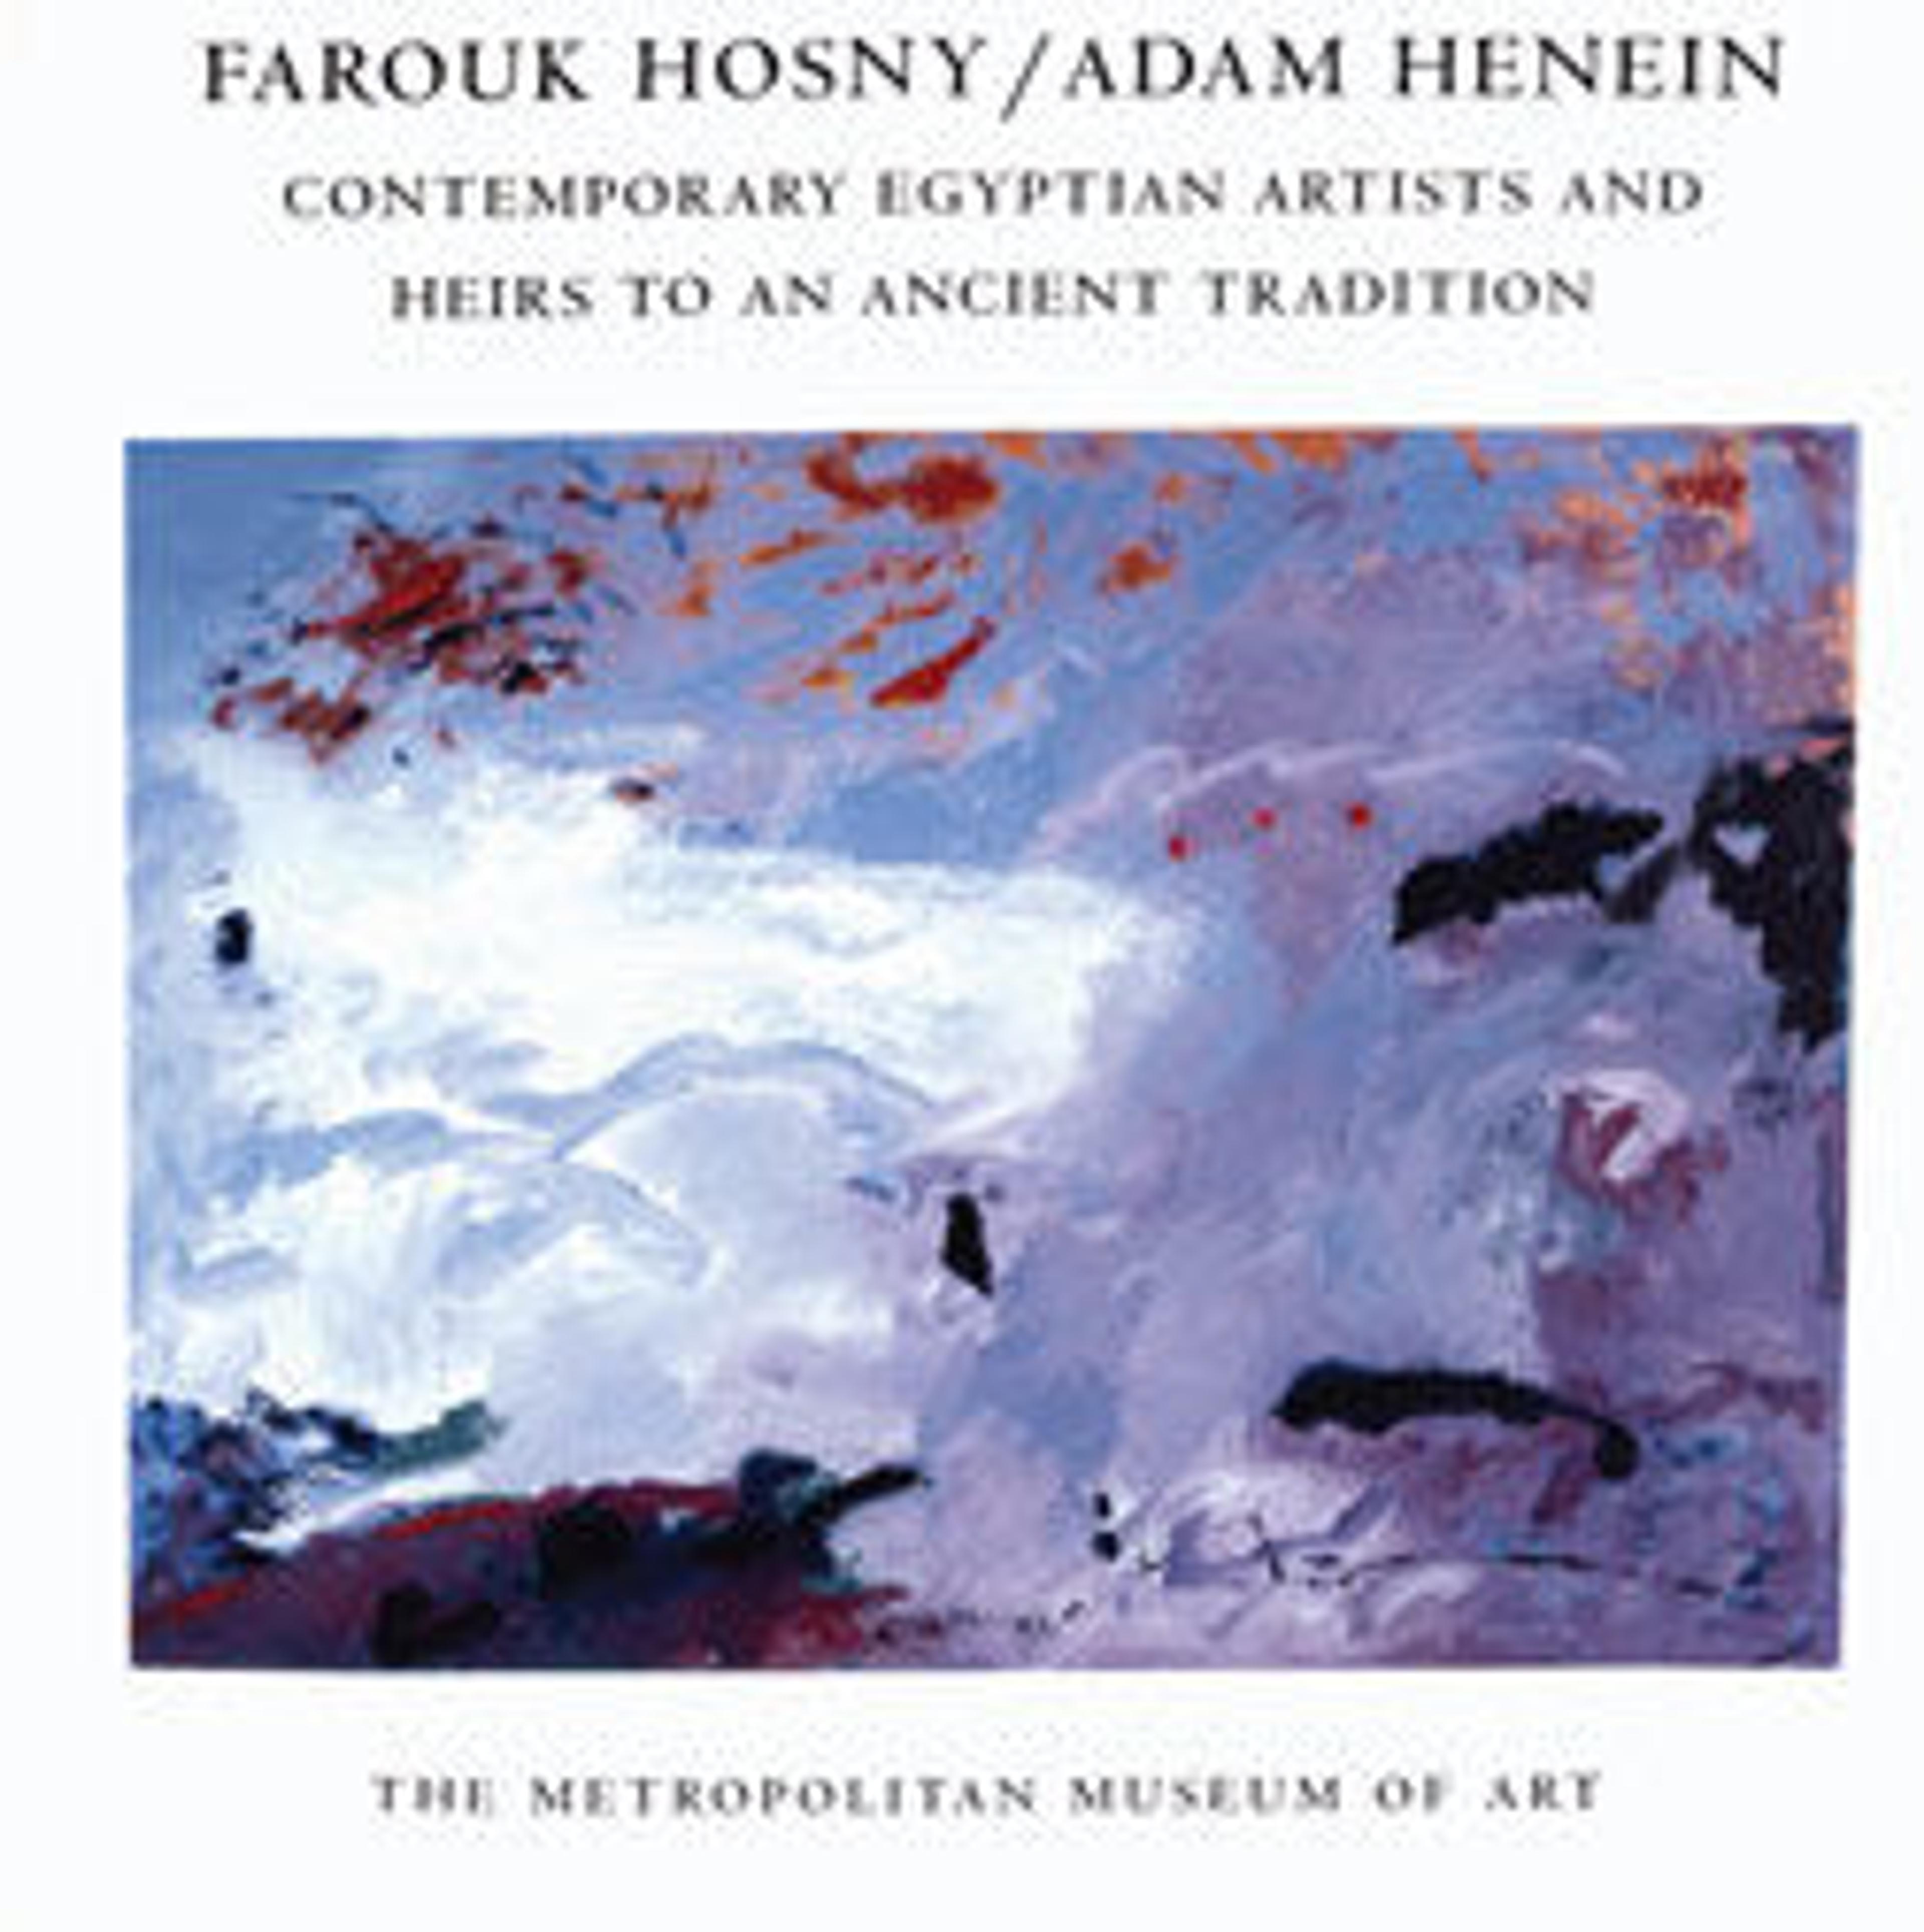 Farouk Hosny/Adam Henein: Contemporary Egyptian Artists and Heirs to an Ancient Tradition